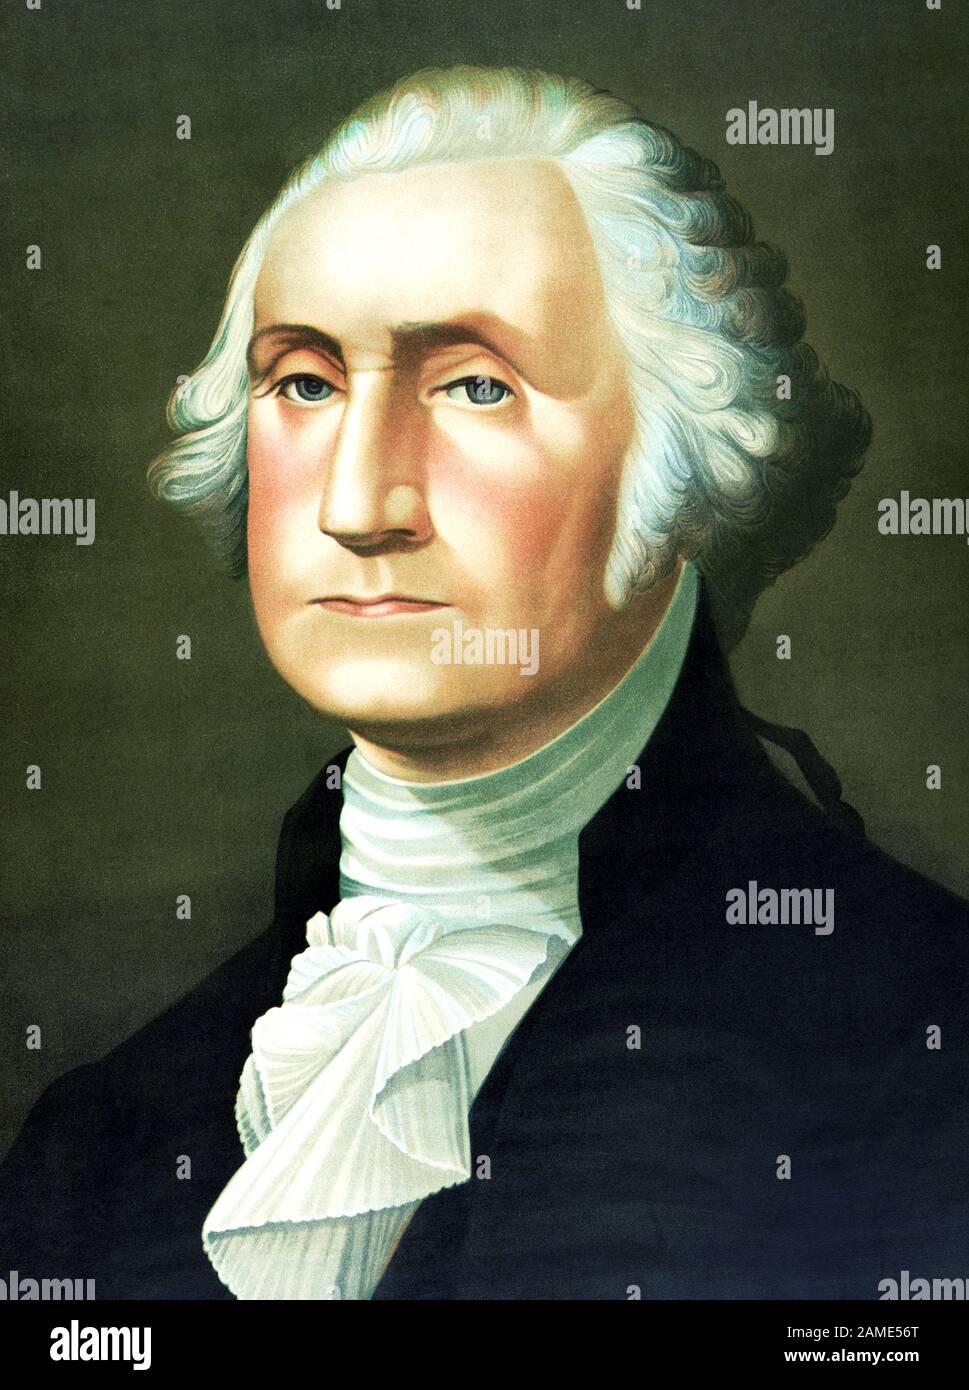 Vintage portrait of George Washington (1732 - 1799) – Commander of the Continental Army in the American Revolutionary War / War of Independence (1775 – 1783) and the first US President (1789 - 1797). Print circa 1896 by J Hoover & Son. Stock Photo